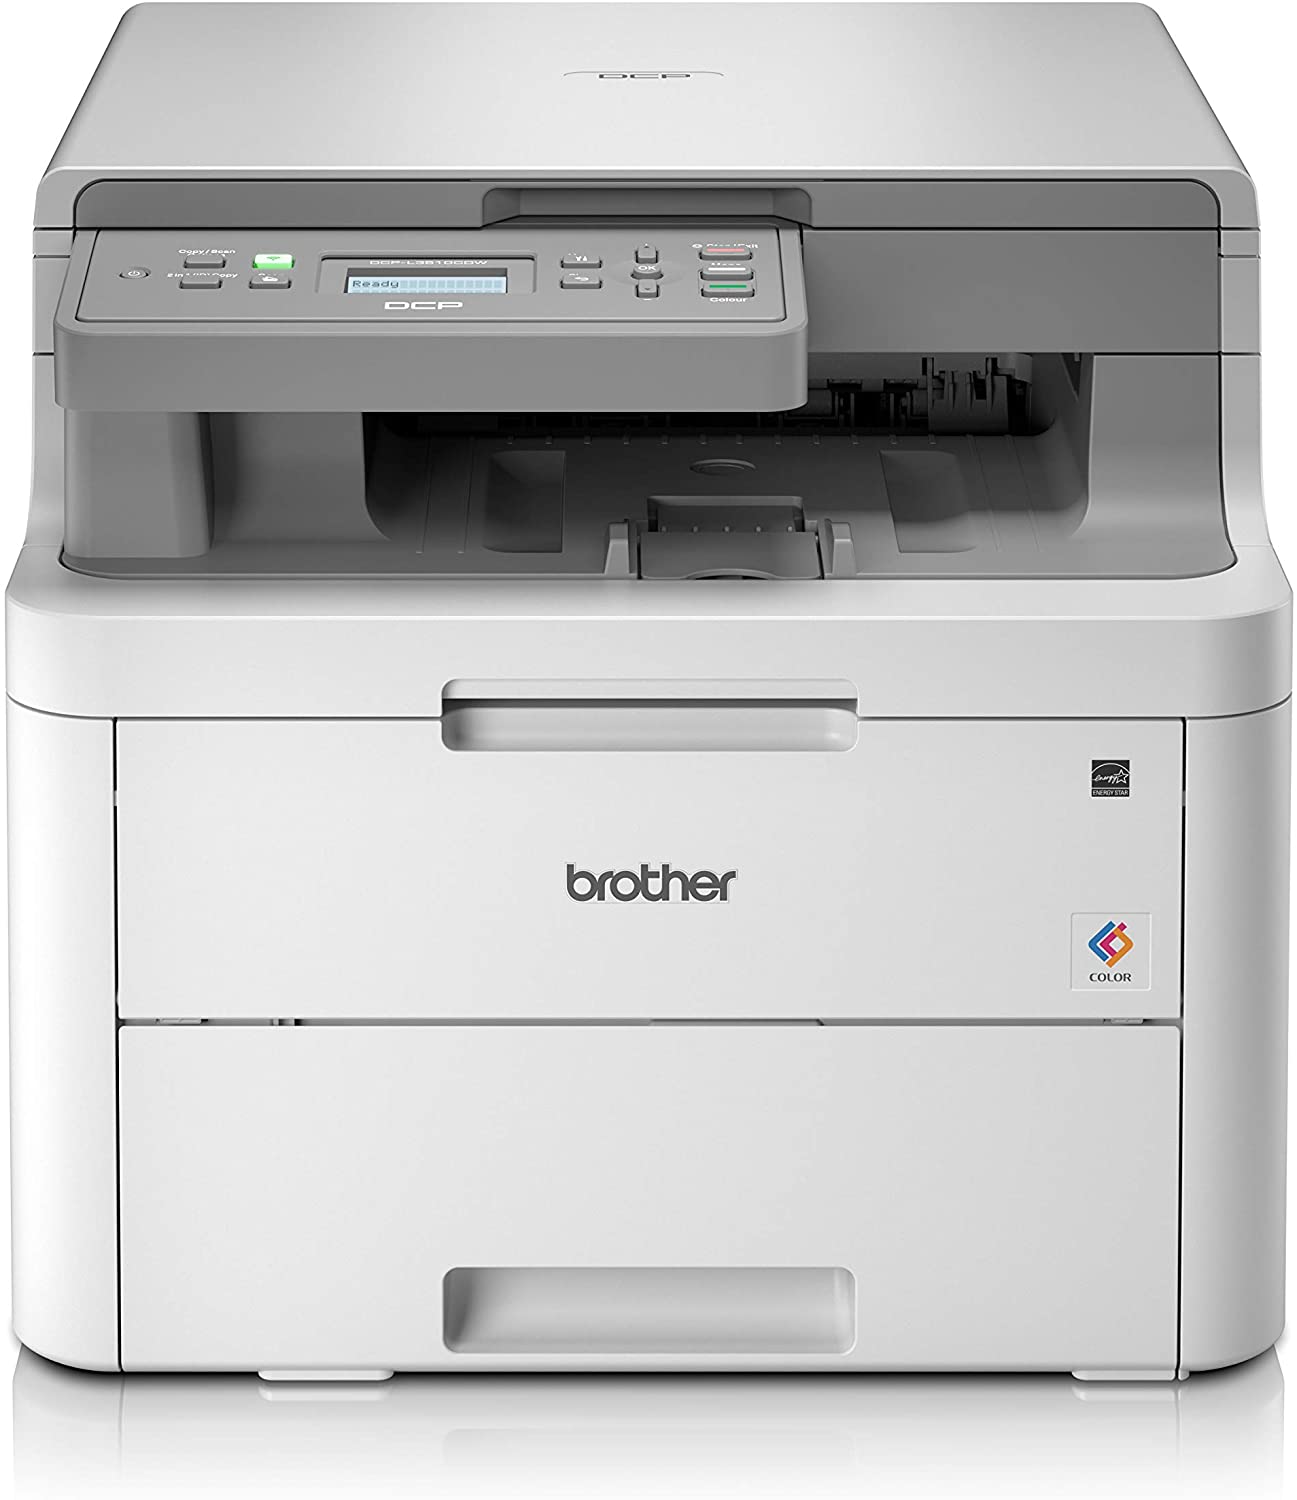  Brother DCP-L3510CDW Colour Laser Printer - All-in-One, Wireless,USB 2.0, Printer,Scanner,Copier, 2 Sided Printing, A4 Printer, Small Office,Home Office Printer uk reviews